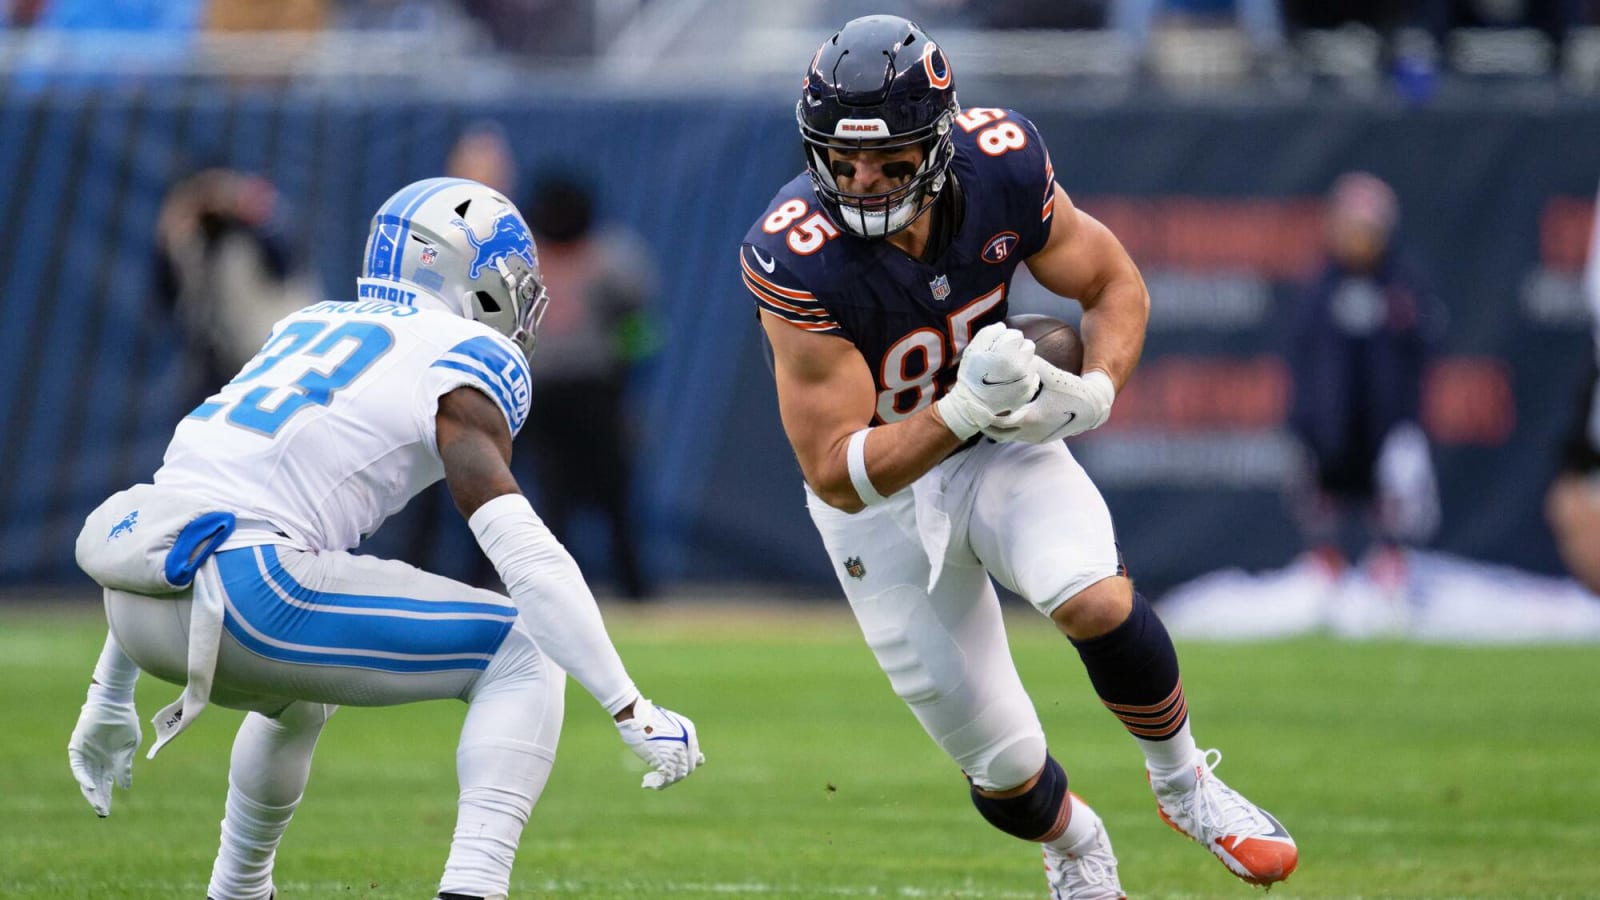 Bears’ Cole Kmet claims the NFL ‘is unfair’ while talking about Bears potentially trading Justin Fields and drafting Caleb Williams